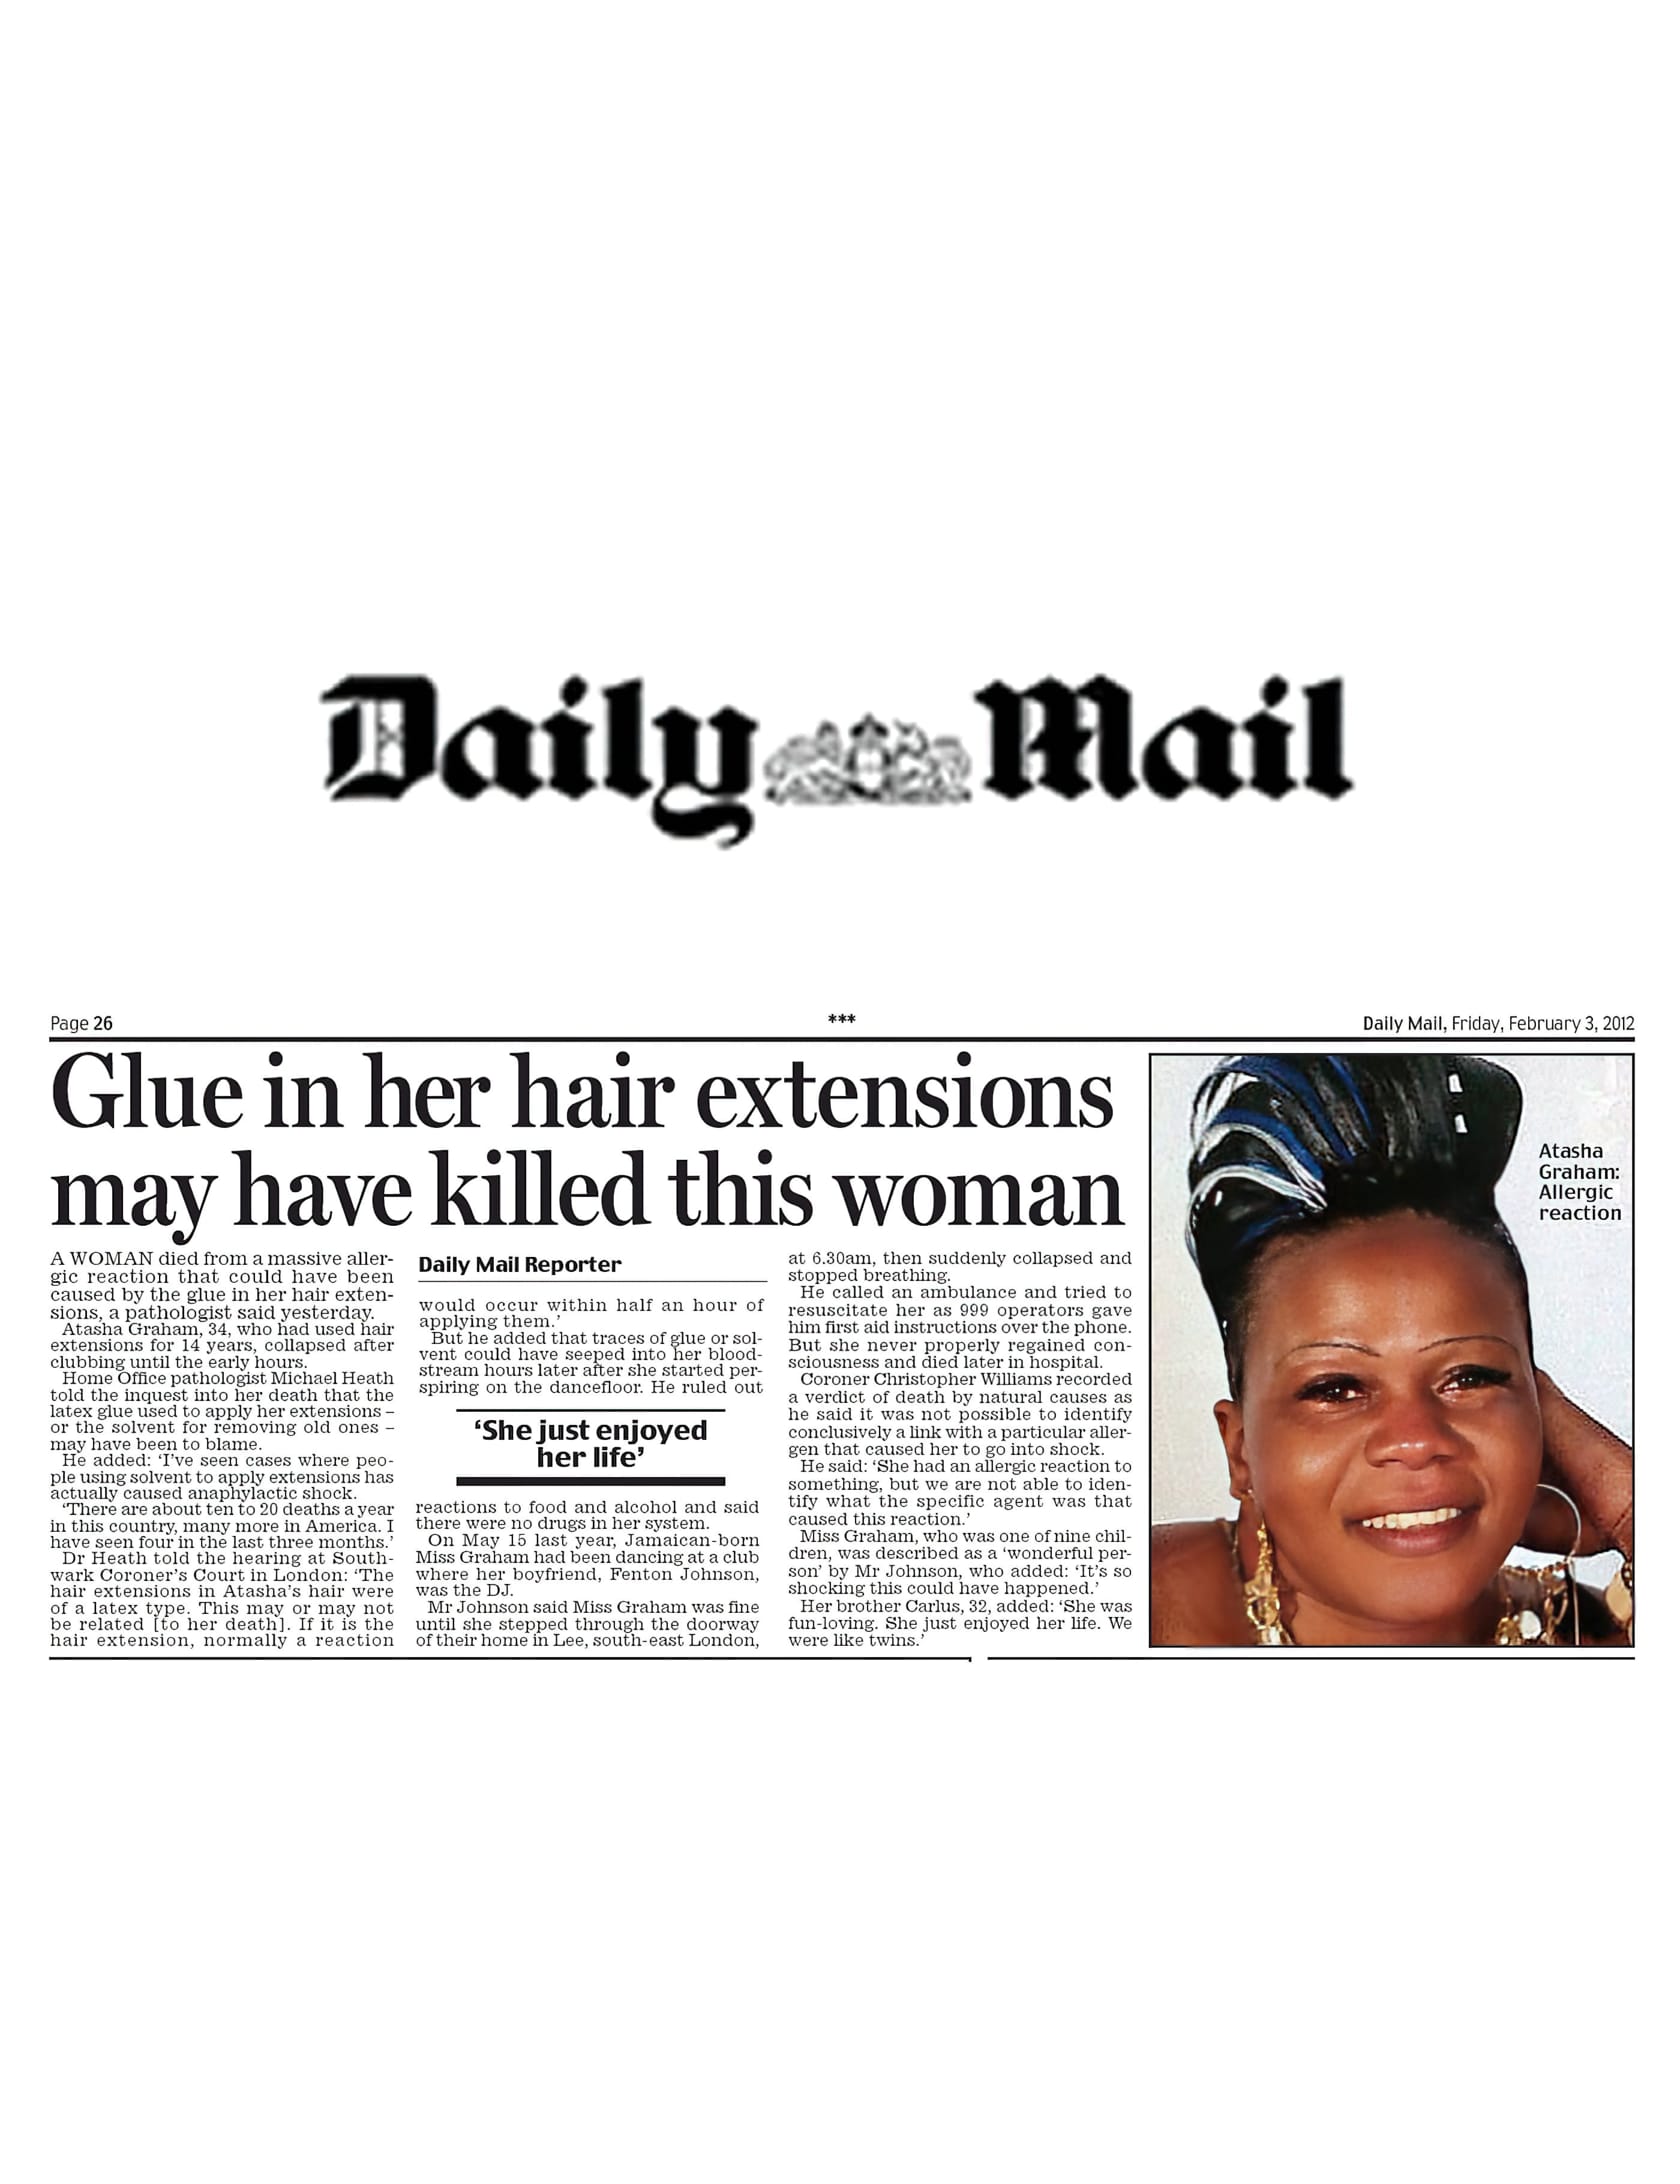 'Glue in her hair extensions may have killed this woman' - Daily Mail